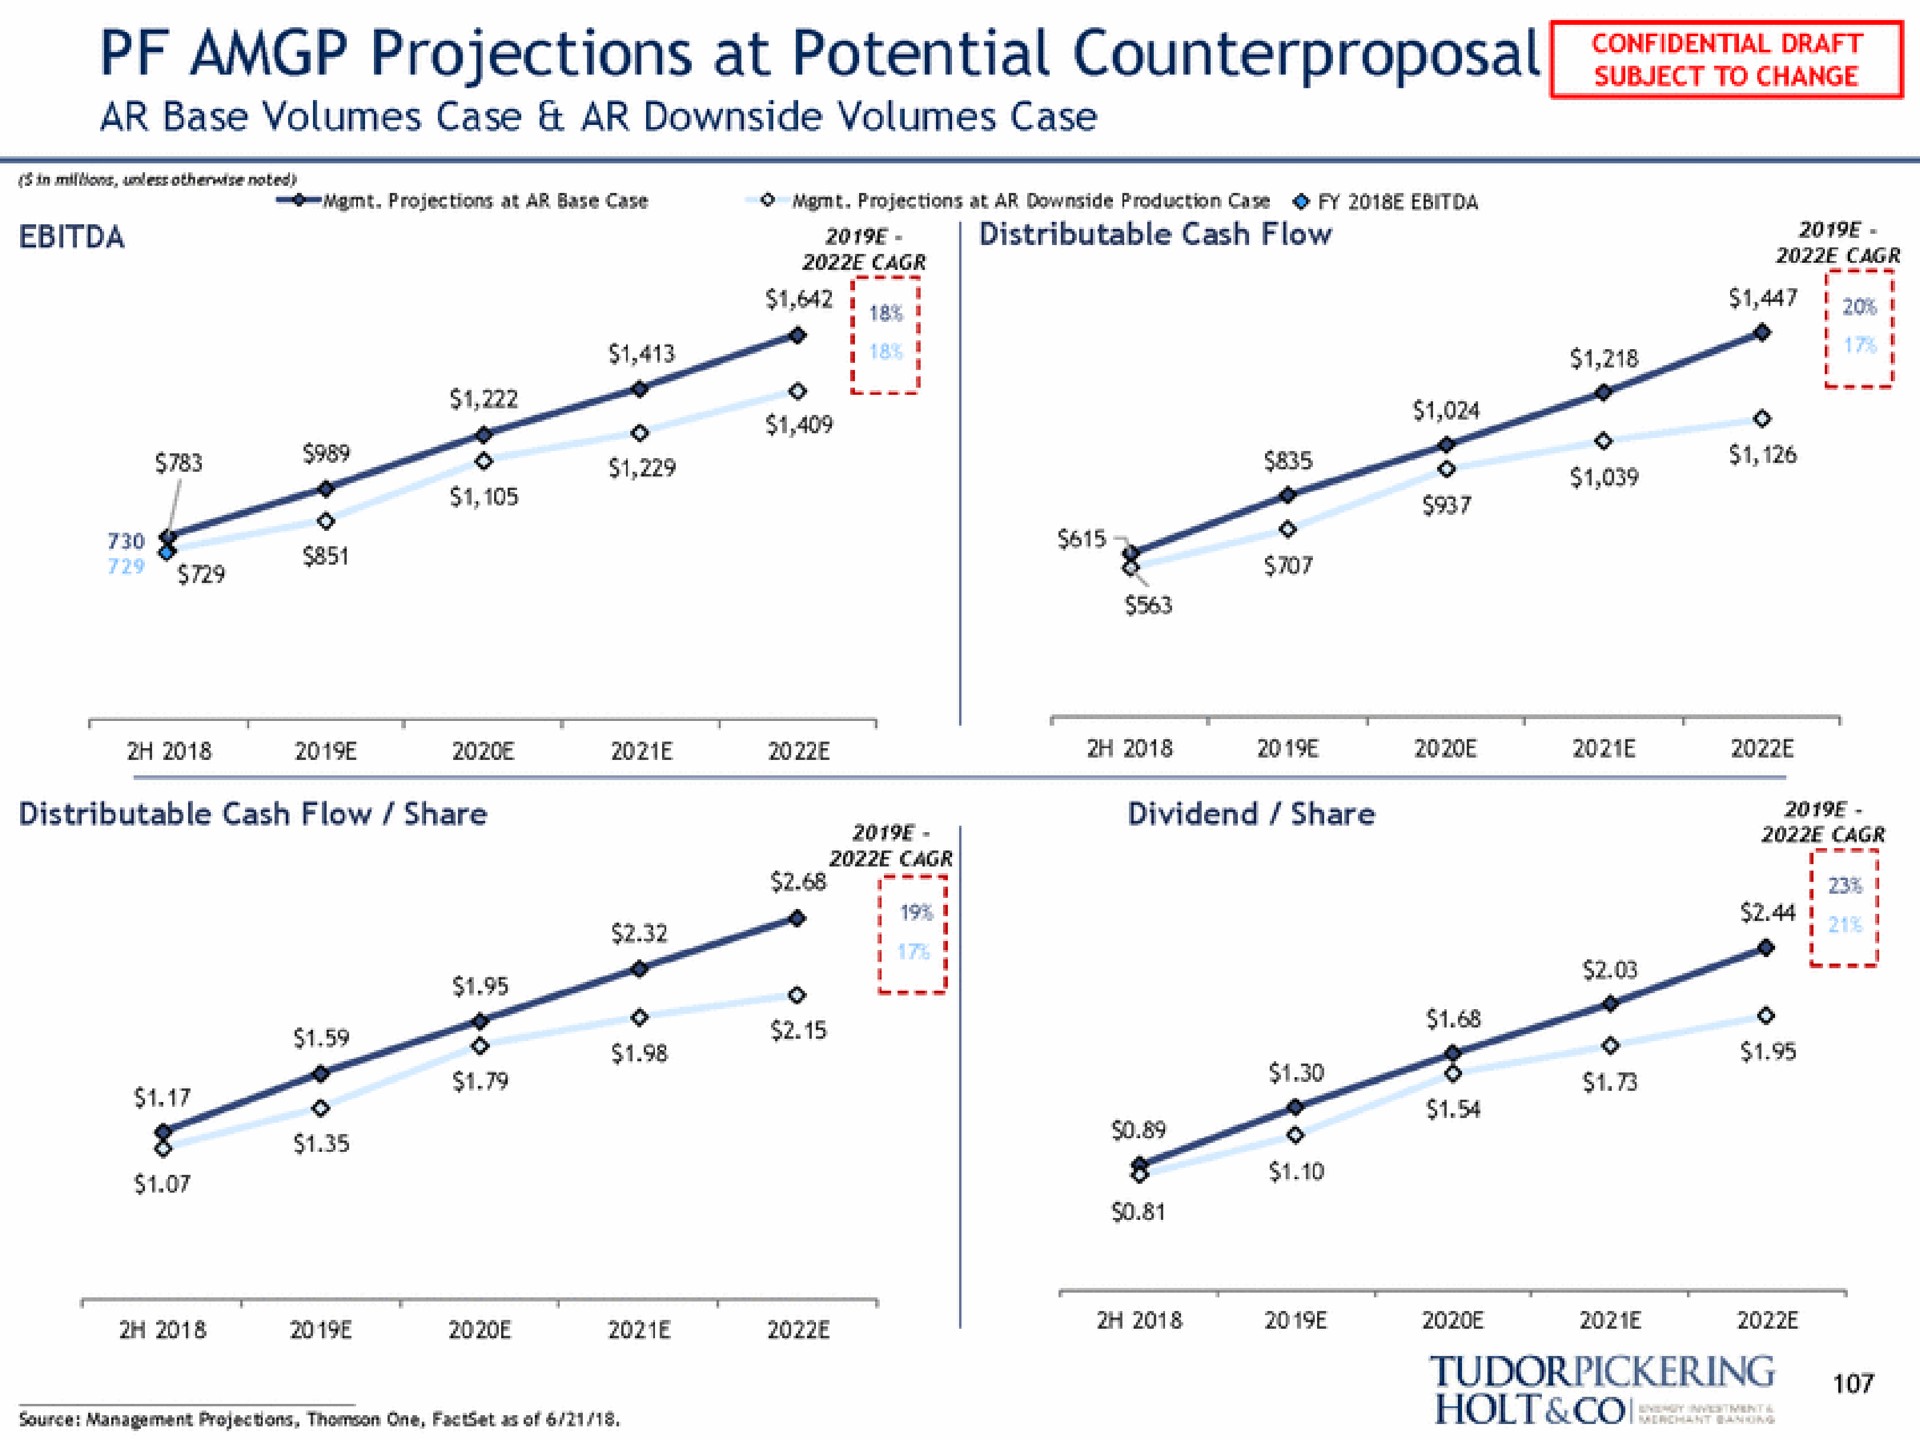 projections at potential counterproposal i | Tudor, Pickering, Holt & Co